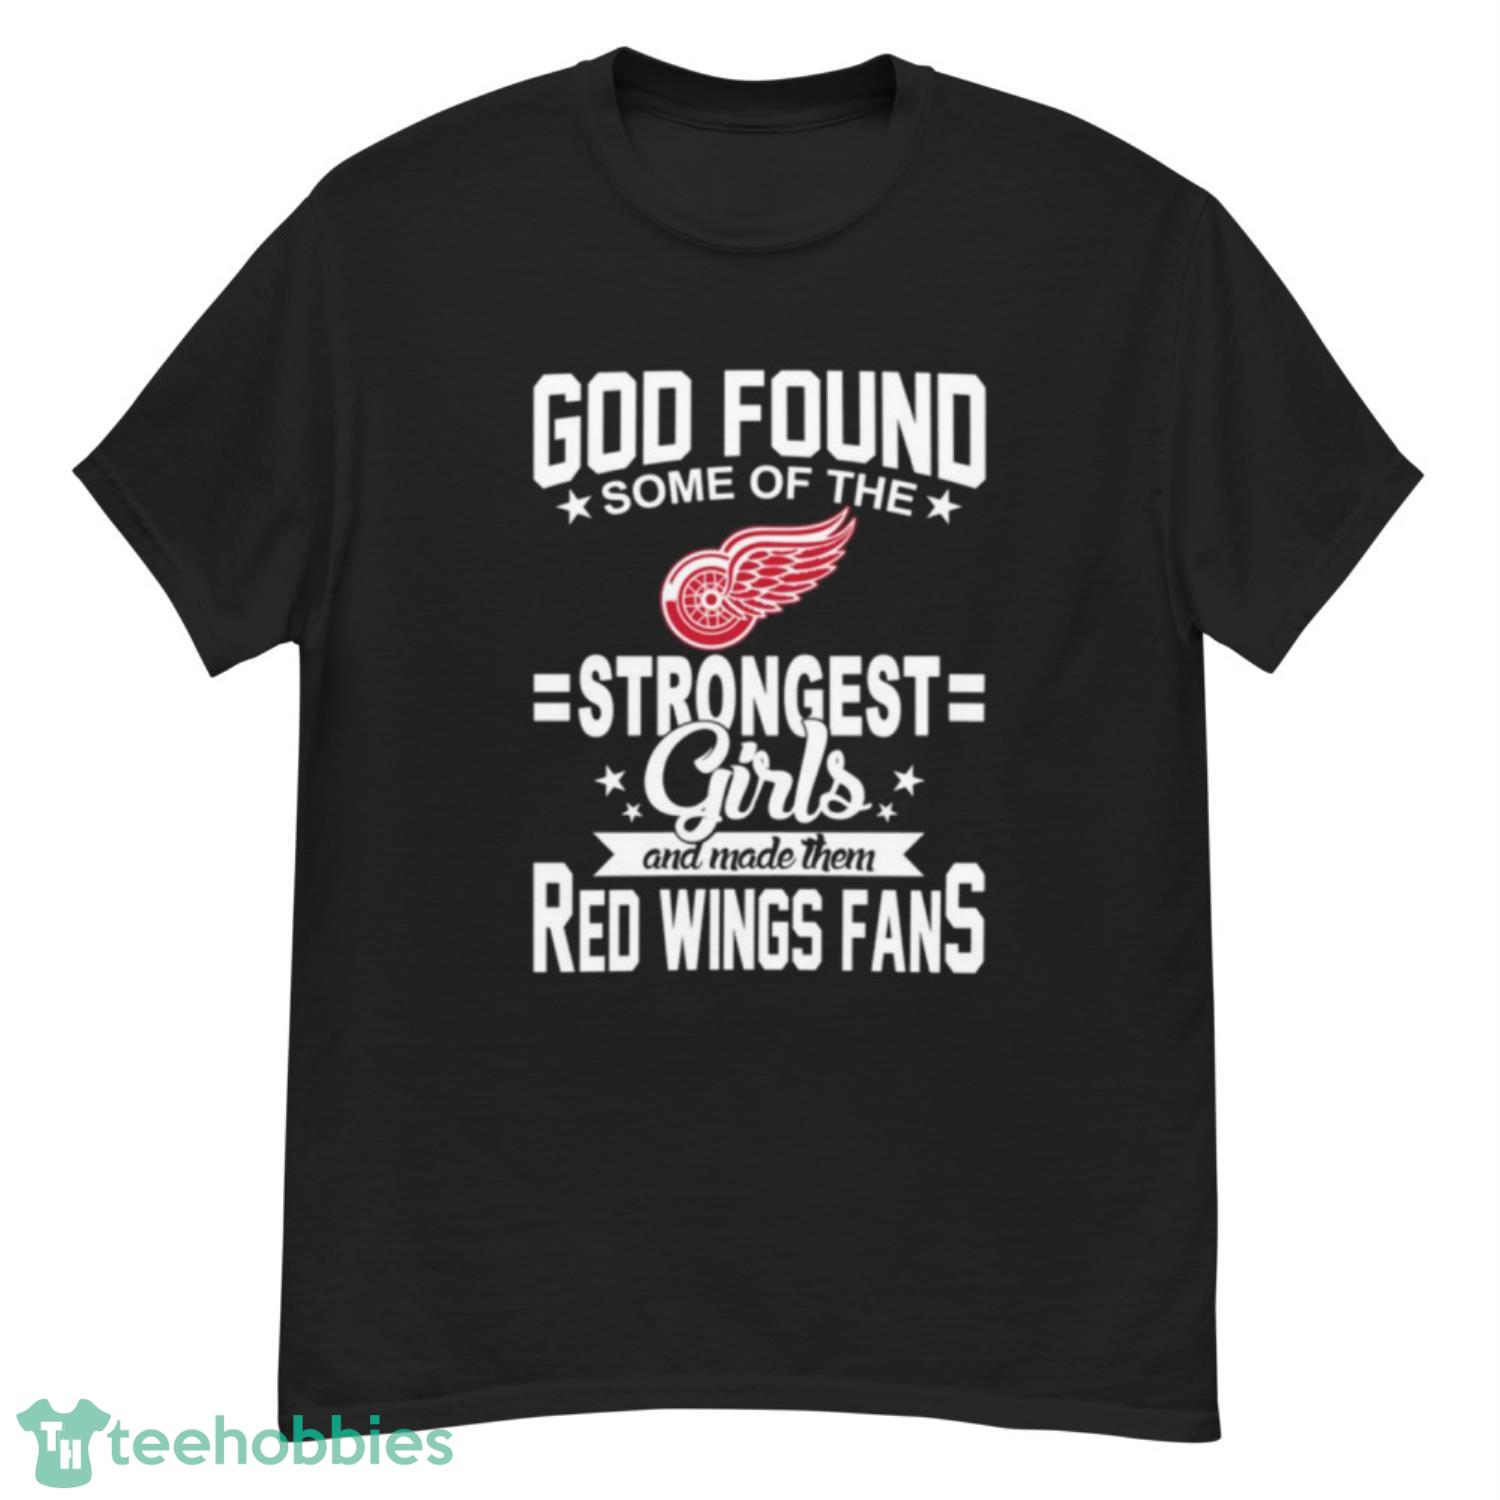 Detroit Red Wings NHL Football God Found Some Of The Strongest Girls Adoring Fans T Shirt - G500 Men’s Classic T-Shirt